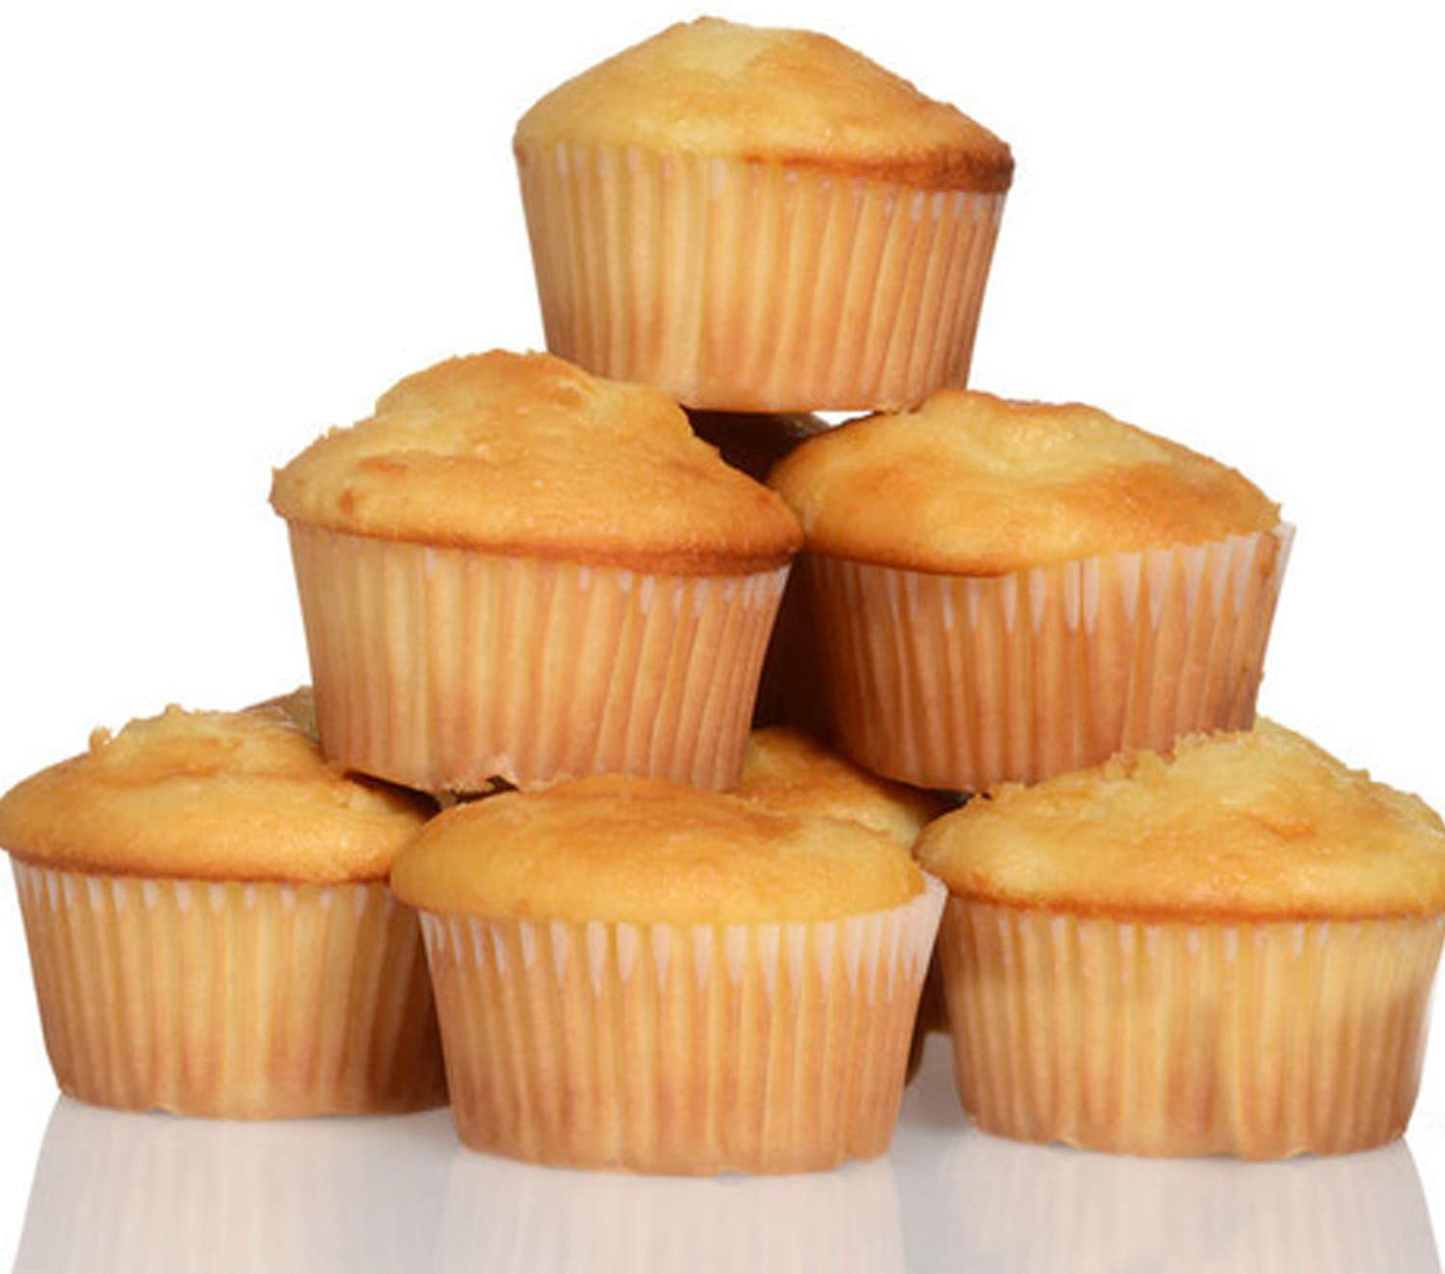 Caperci Standard White Cupcake Liners 500 Count, No Smell, Food Grade & Grease-Proof Baking Cups Paper